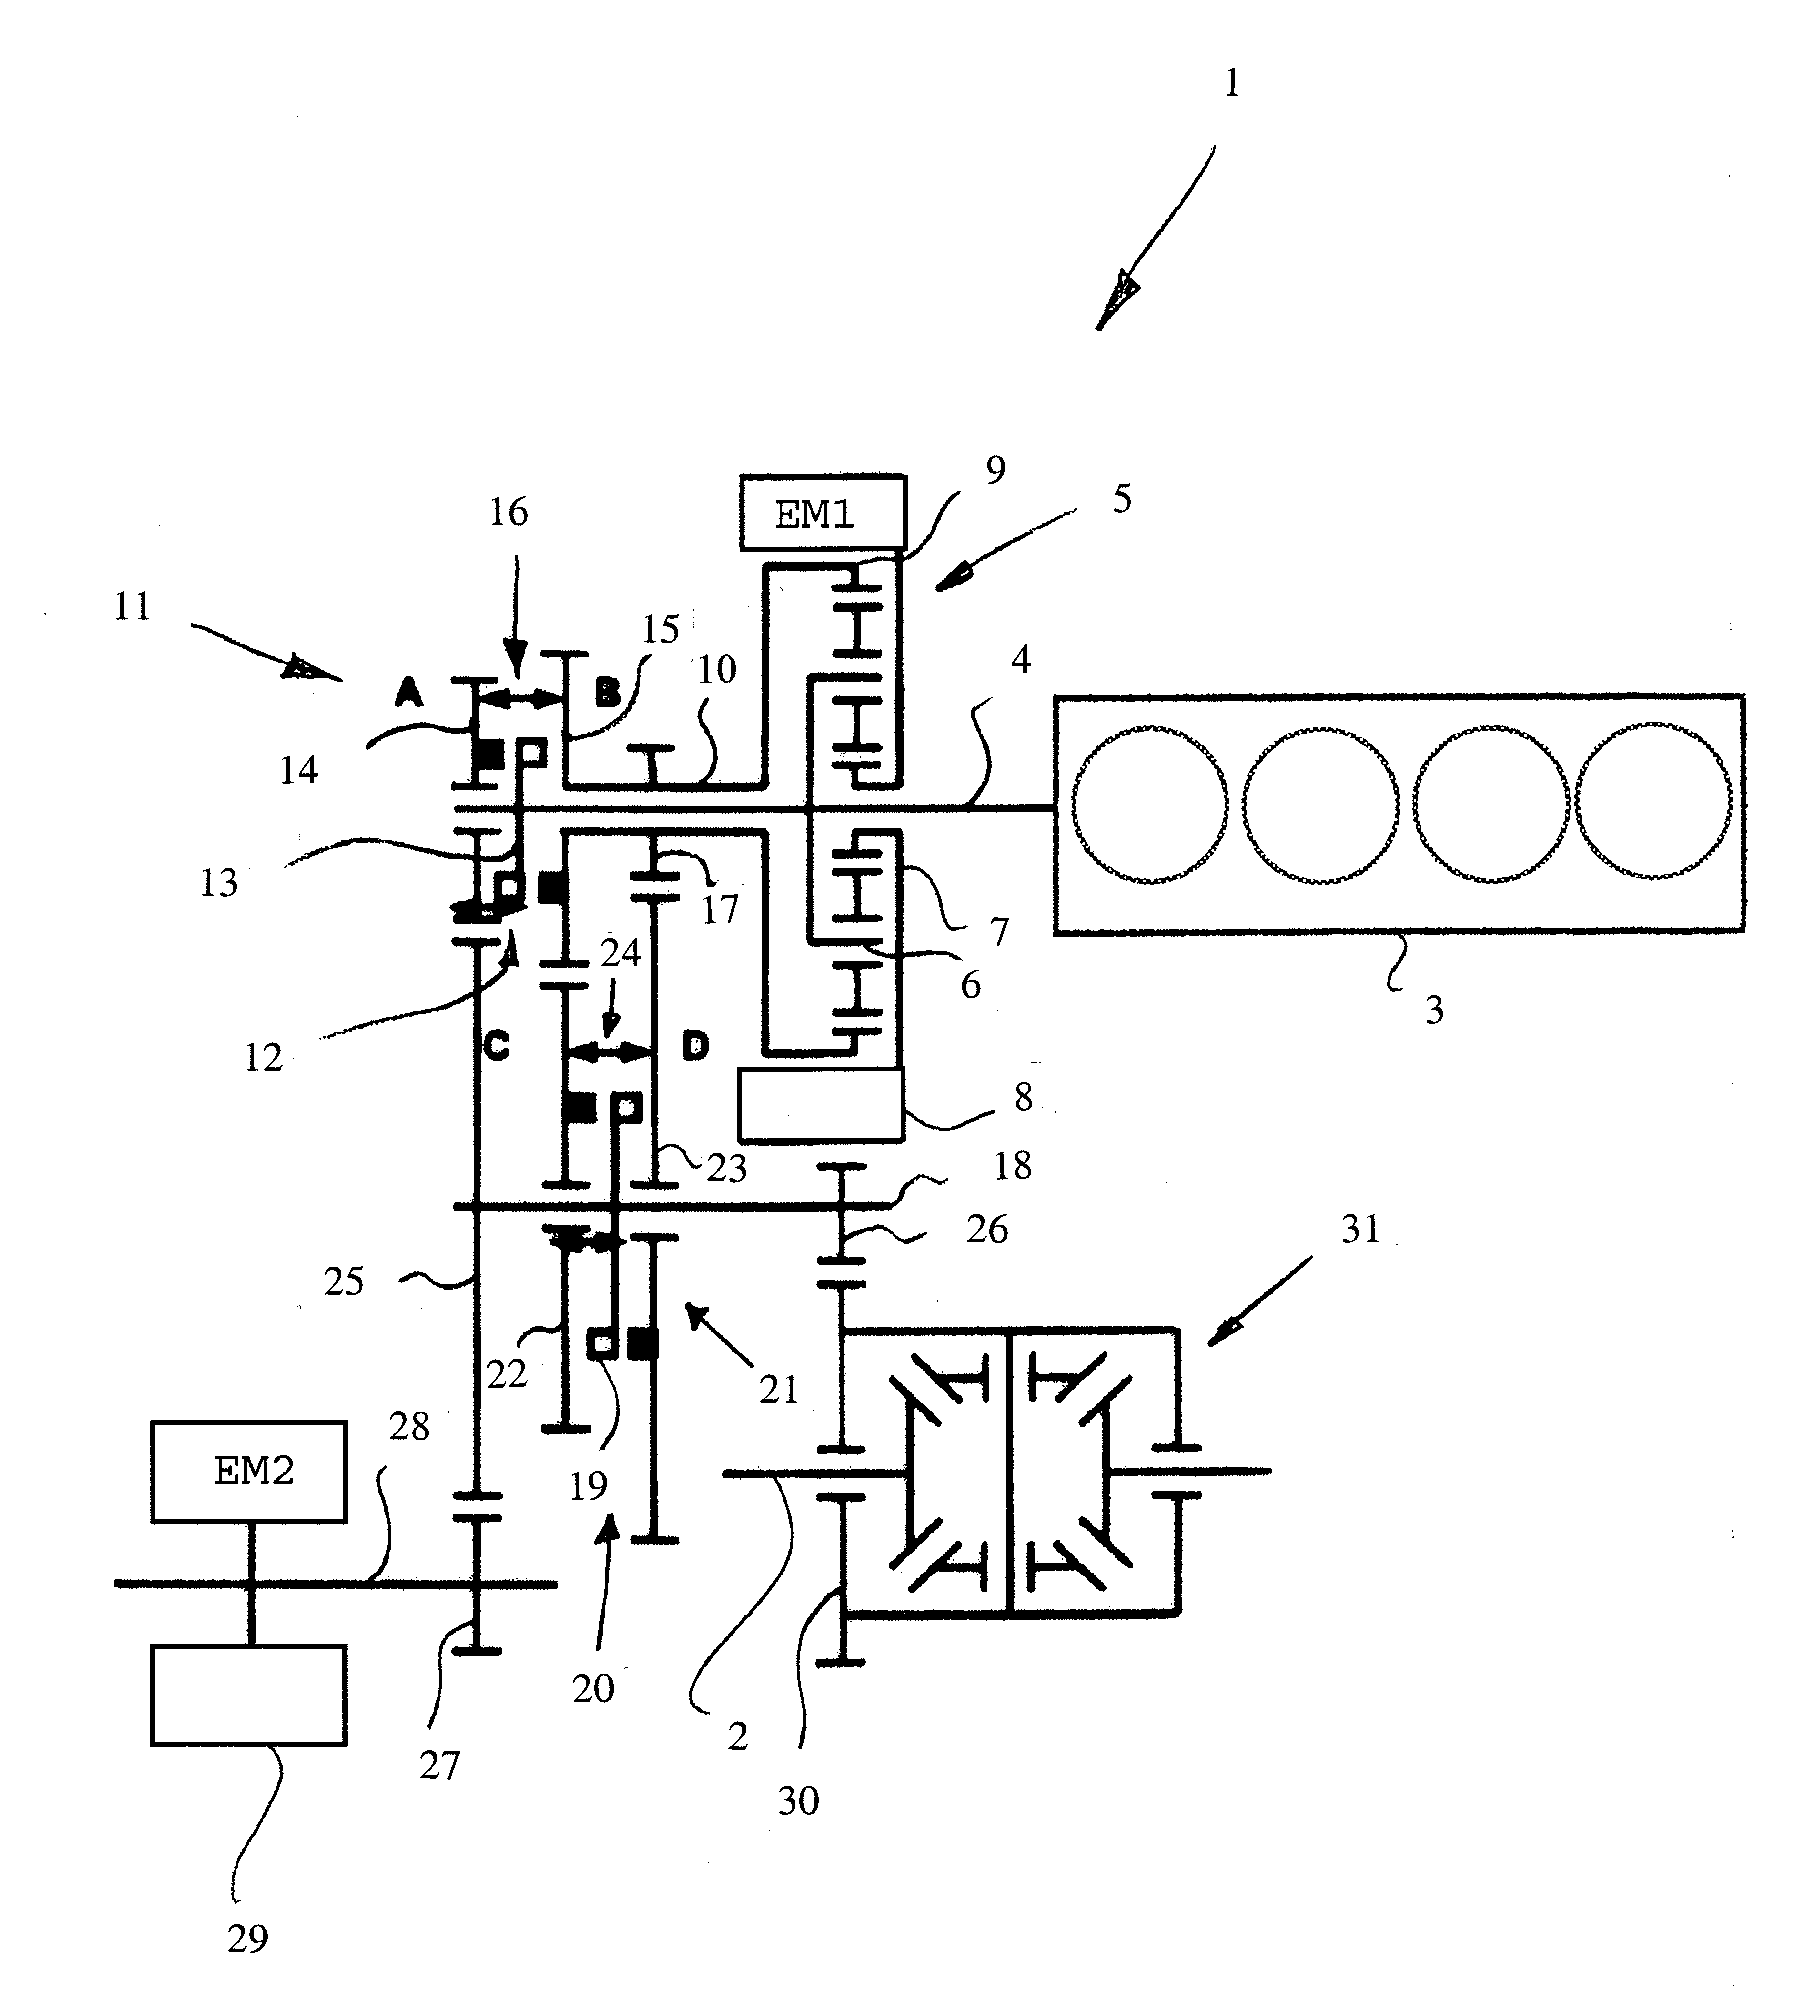 Hybrid drive train for a motor vehicle